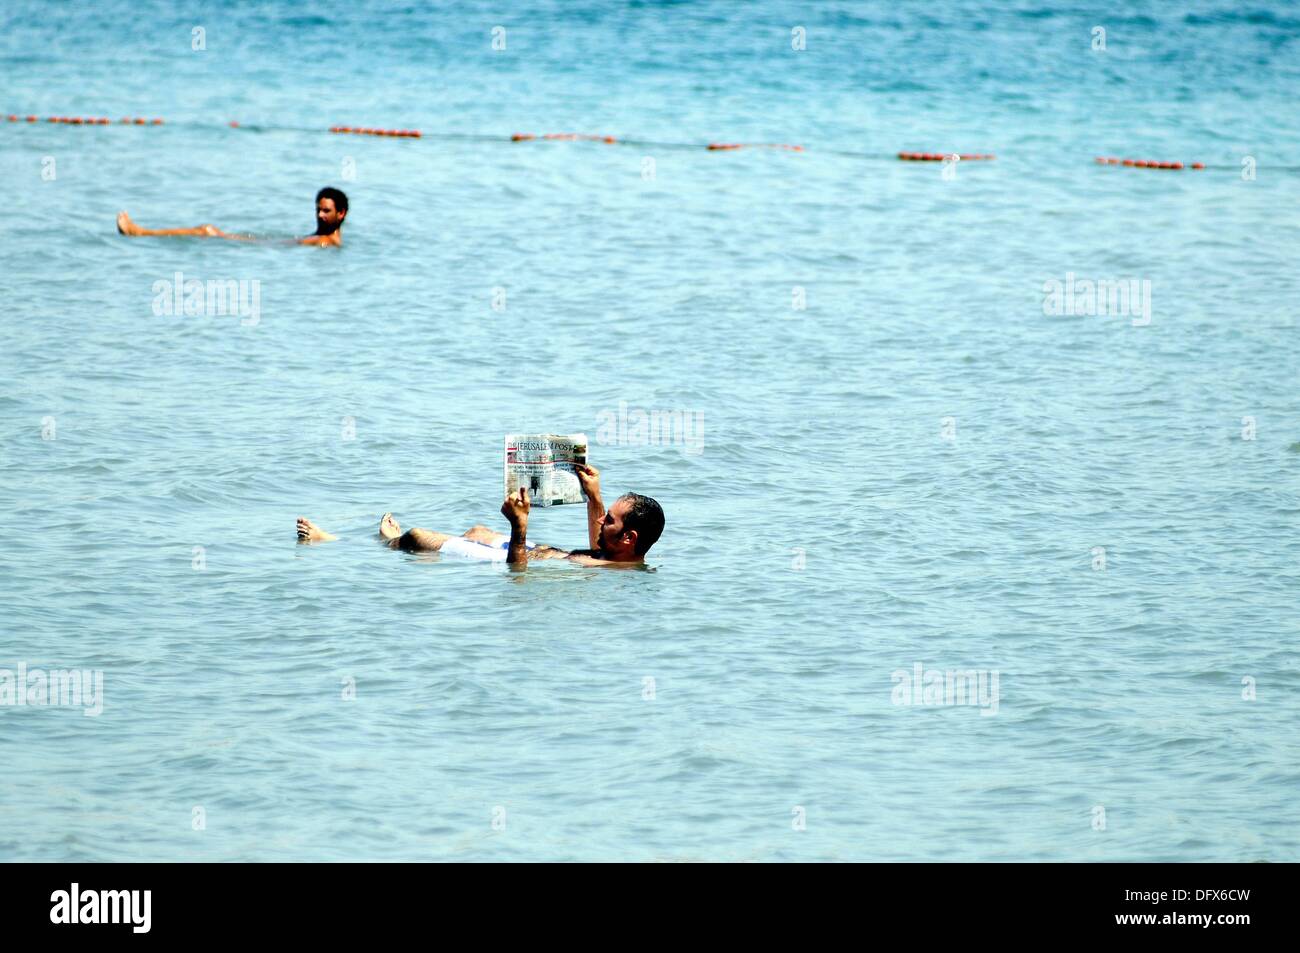 Reading the newspaper in the Dead Sea - a popular photograph subject, in Israel, 11 September 2013. The Dead Sea, bordering Israel and Jordan, is famous for its high salinity of about 30% (around ten times more than the Mediterranean Sea) that easily carries the human body. Its water source is the River Jordan and it does not have an outlet; healing powers for atopic dermatitis and psioriasis are attributed to its water and mud. This is reason, health tourism has developed at different places of the Dead Sea. The whole area of the Dead Sea lies 416 meters below sea level. Photo: Matthias Tödt Stock Photo